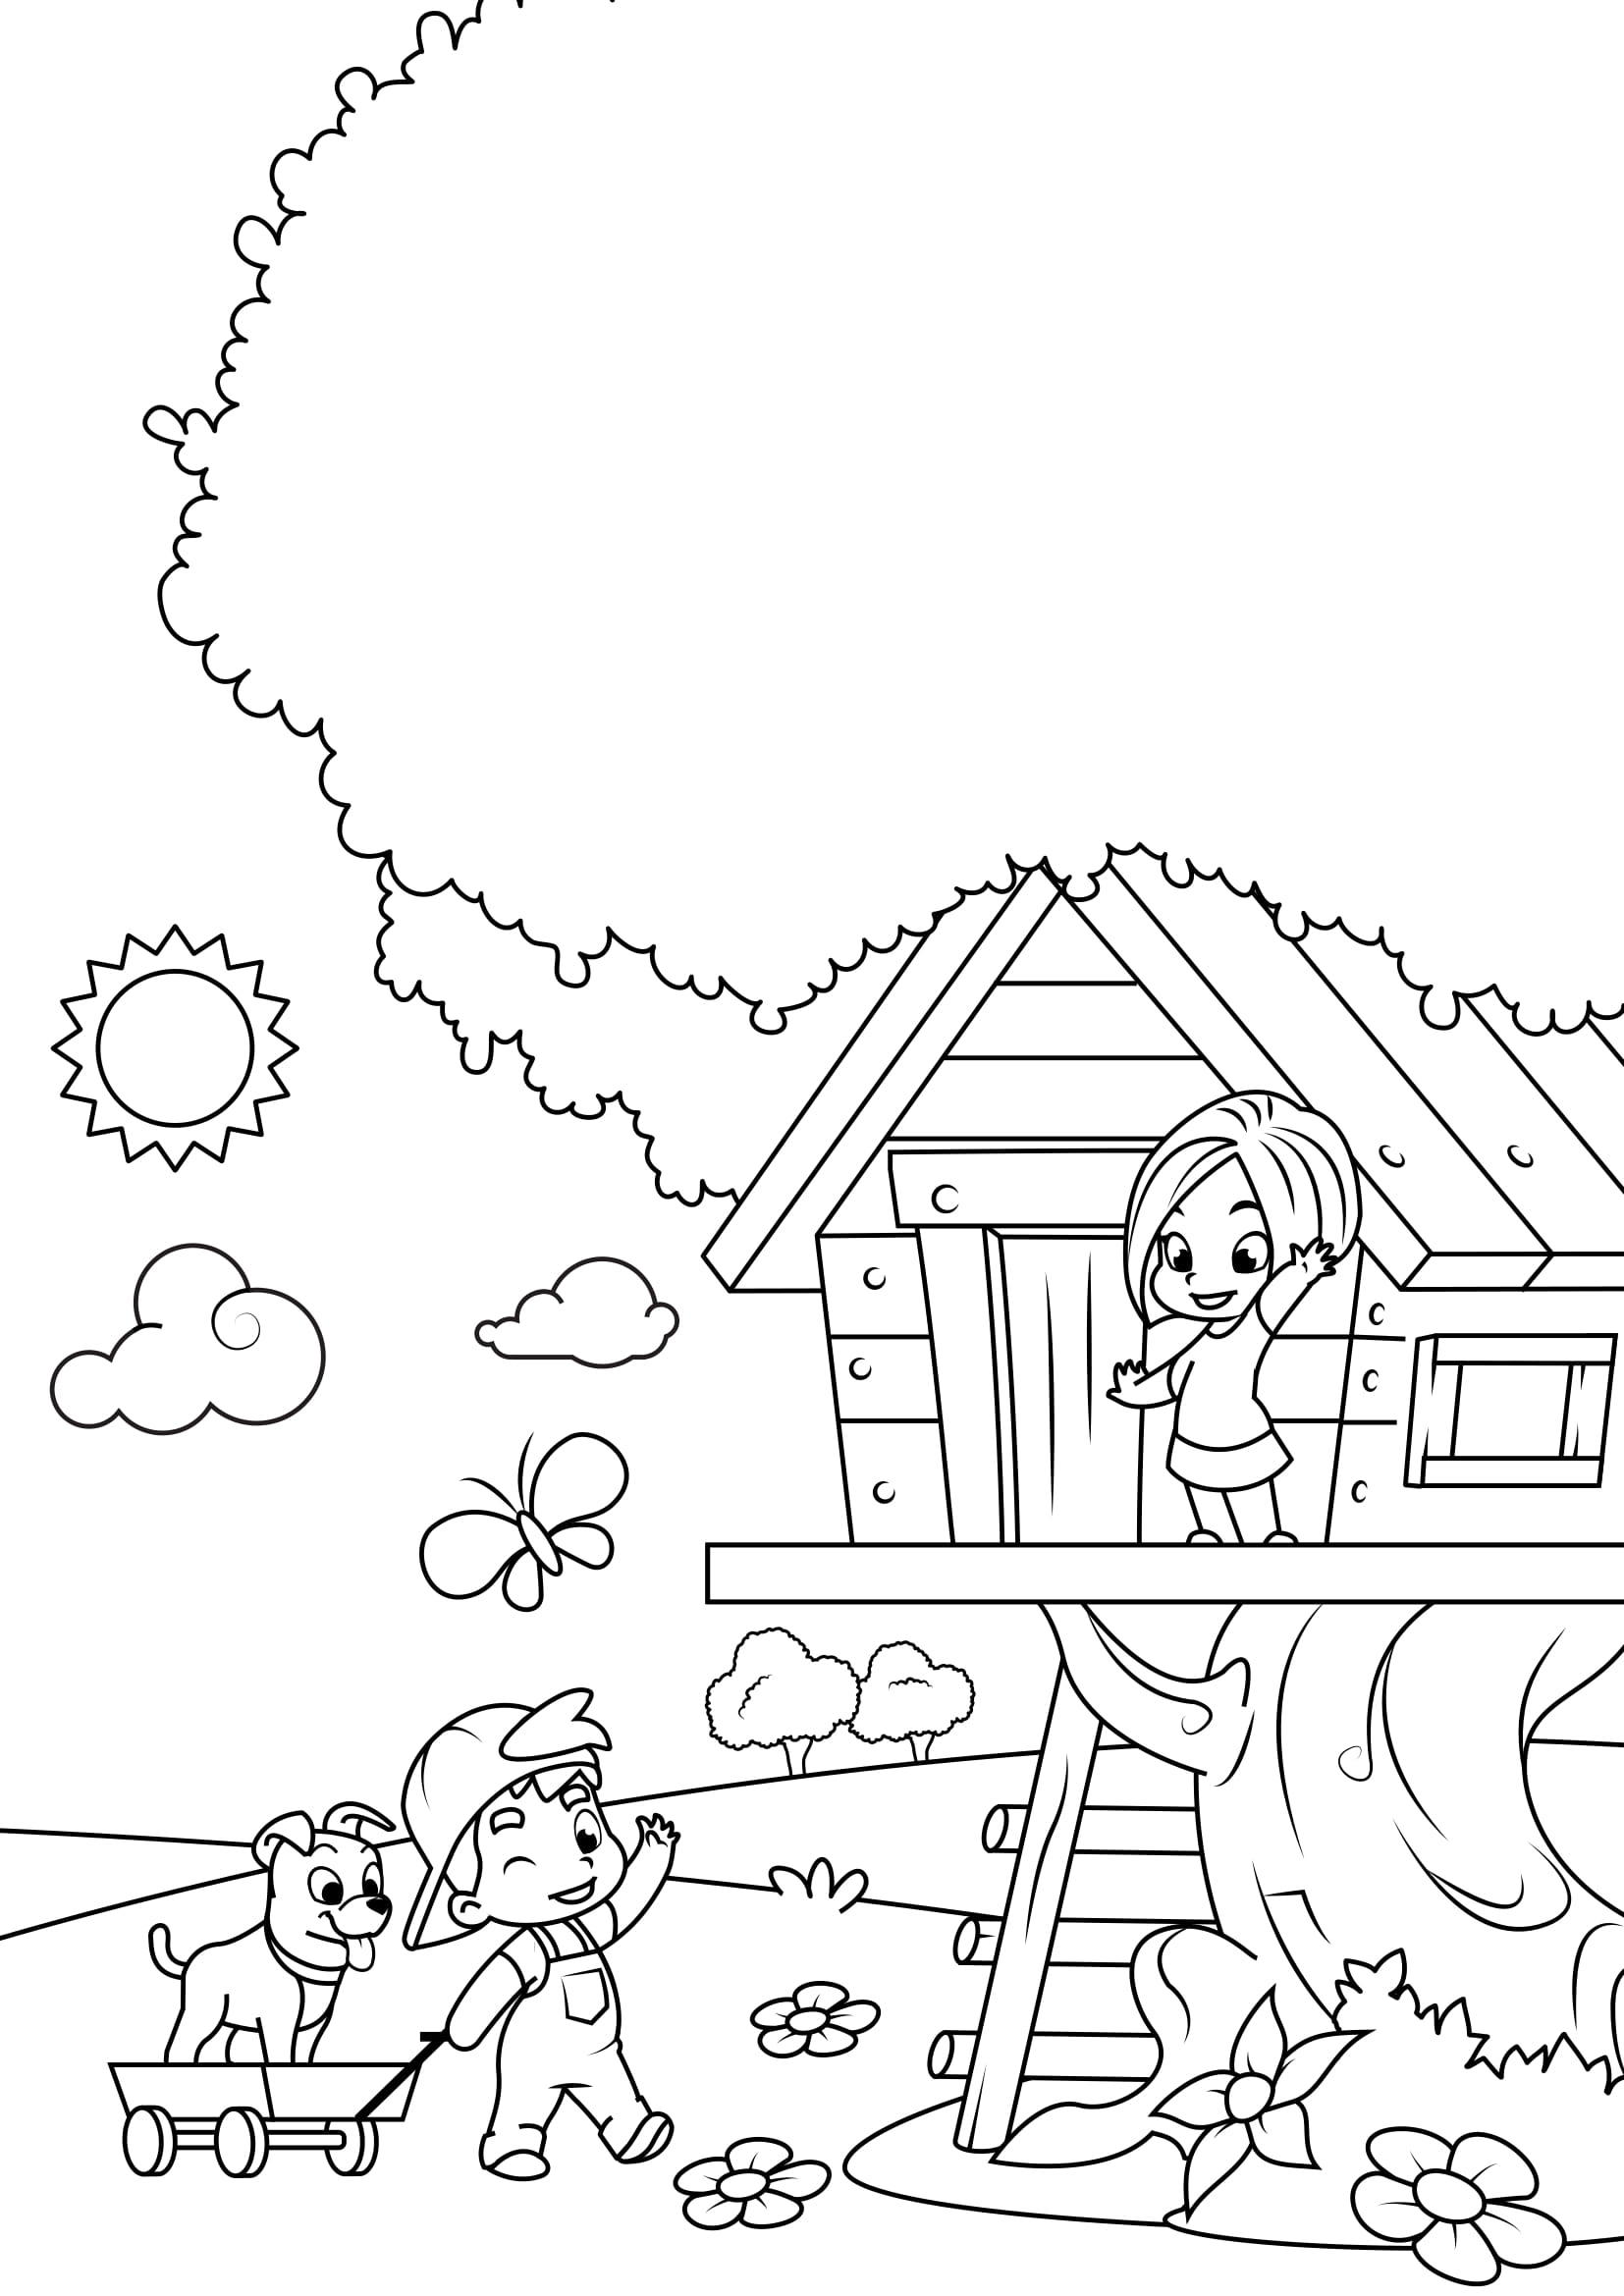 Coloring page spring - playing in the tree house